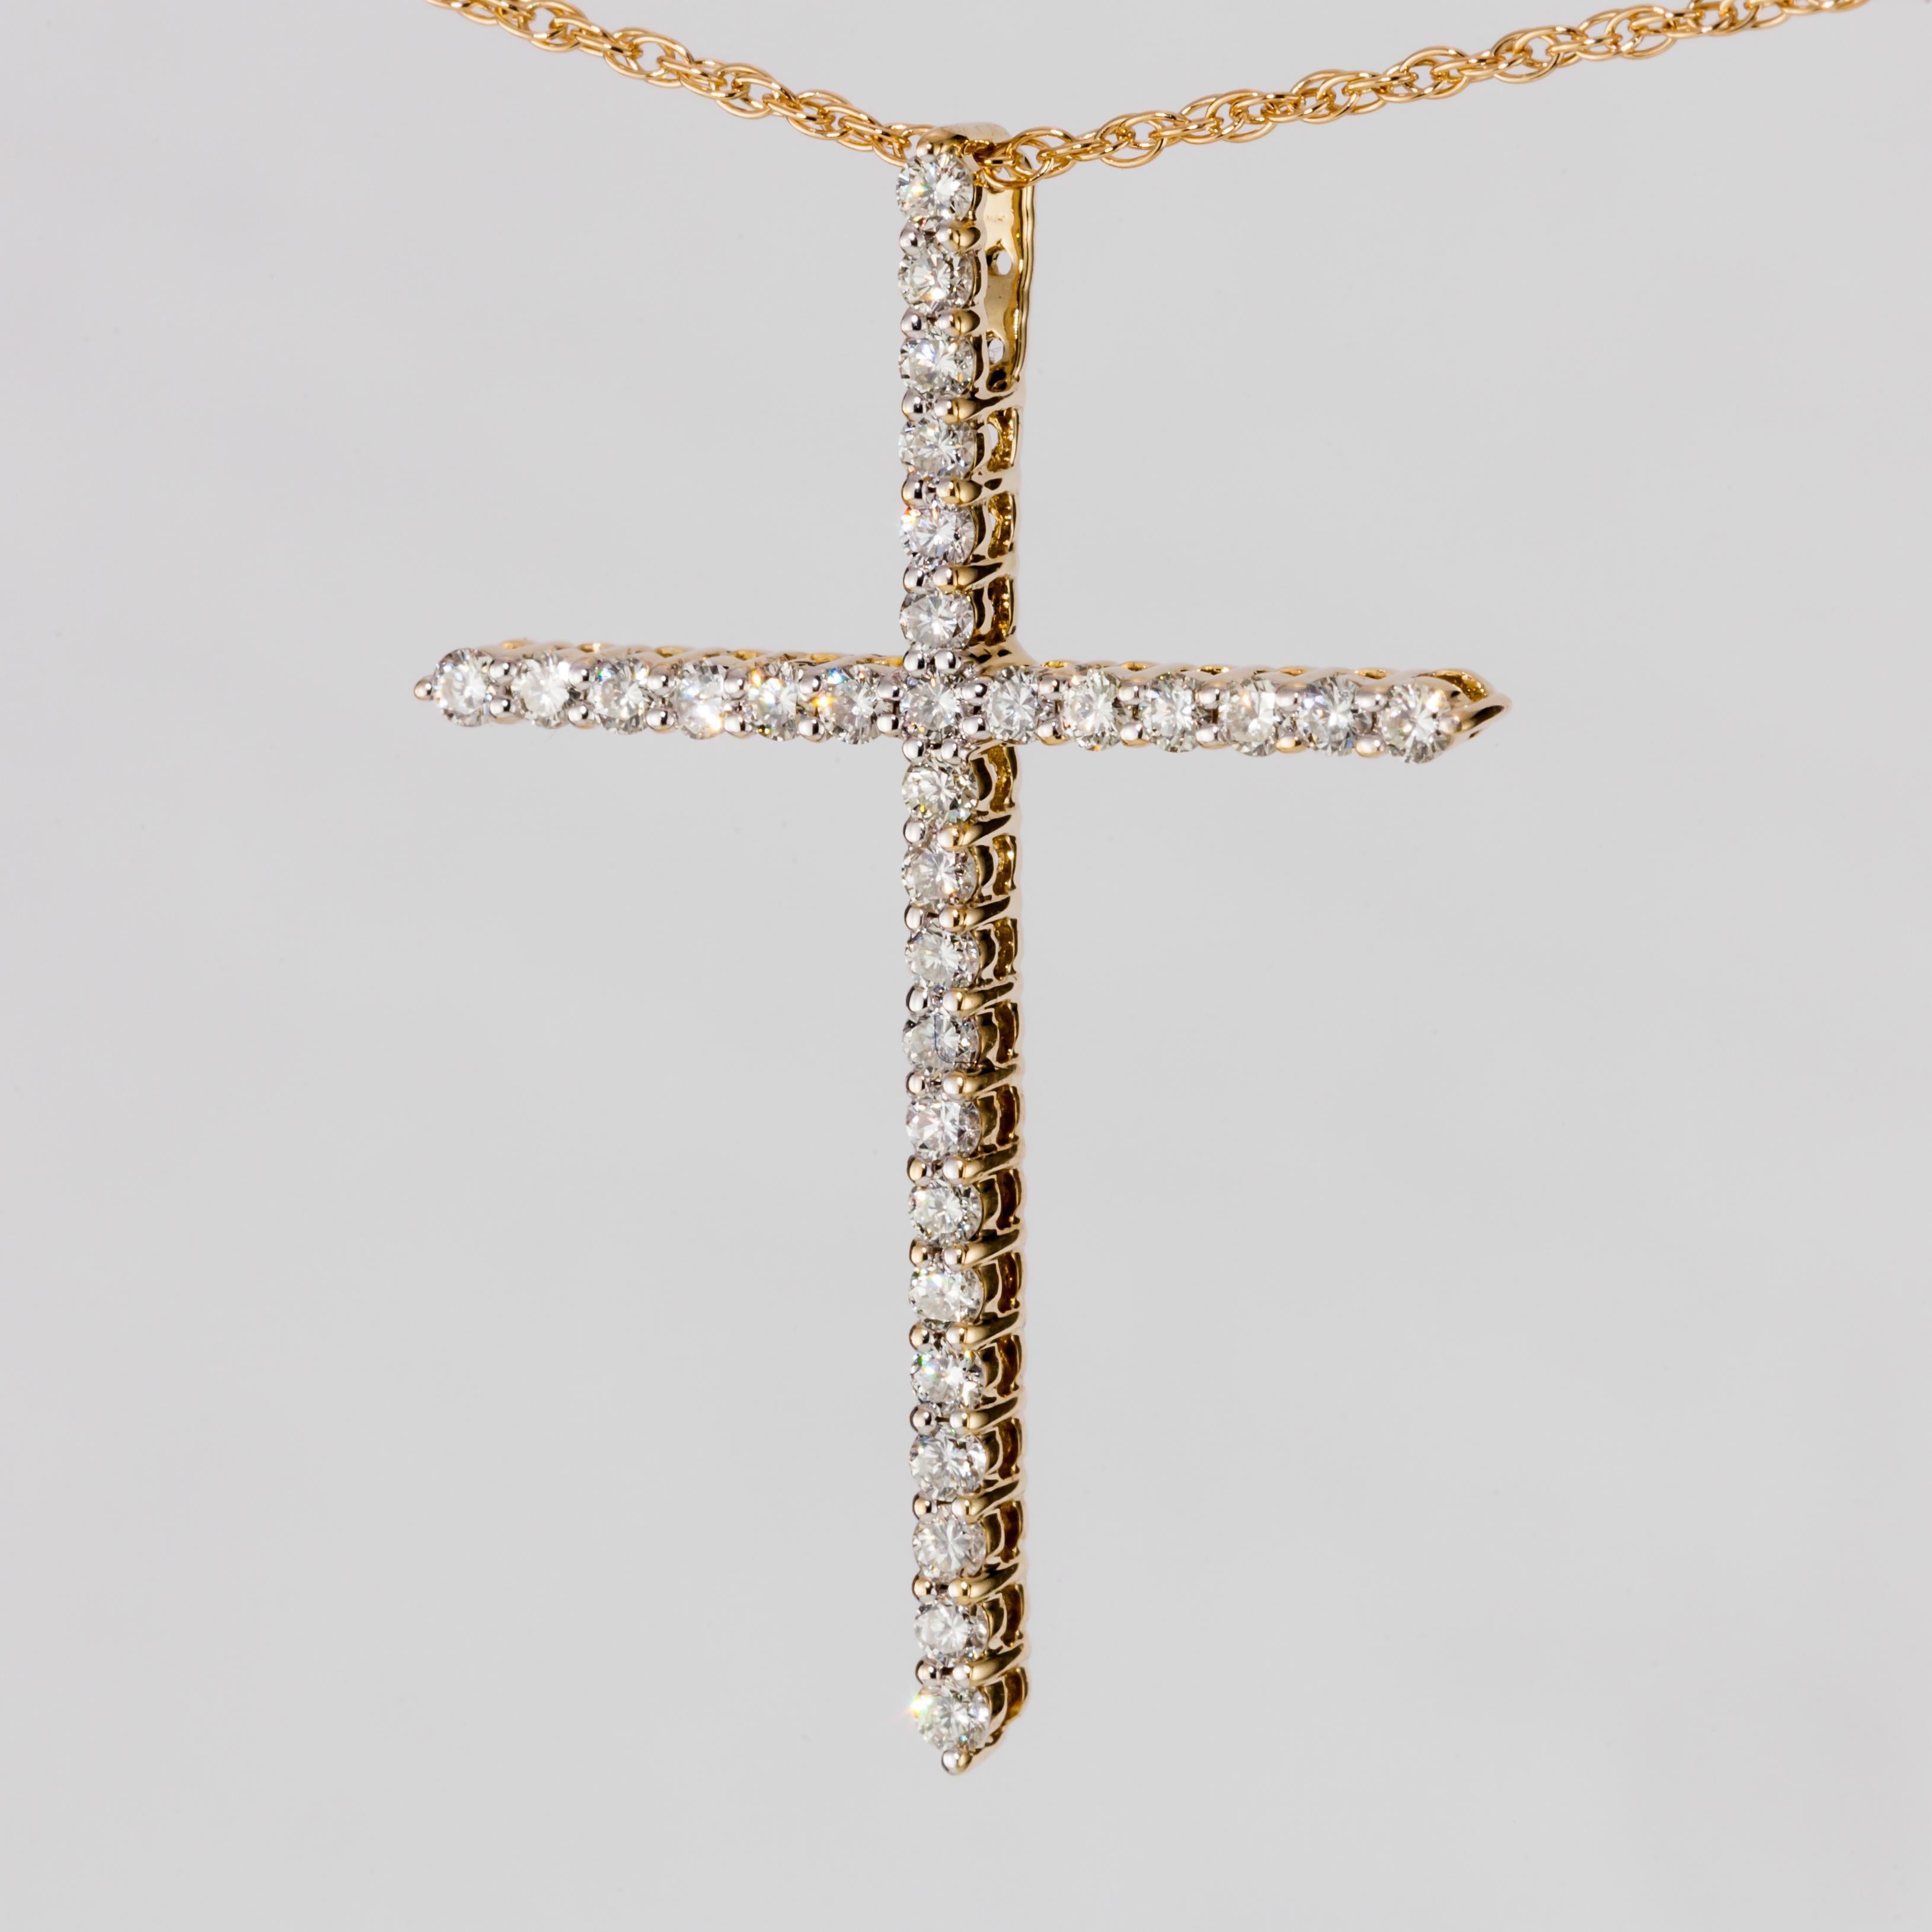 0.56 Carat Diamond Cross Pendant in Yellow Gold with Chain For Sale 4